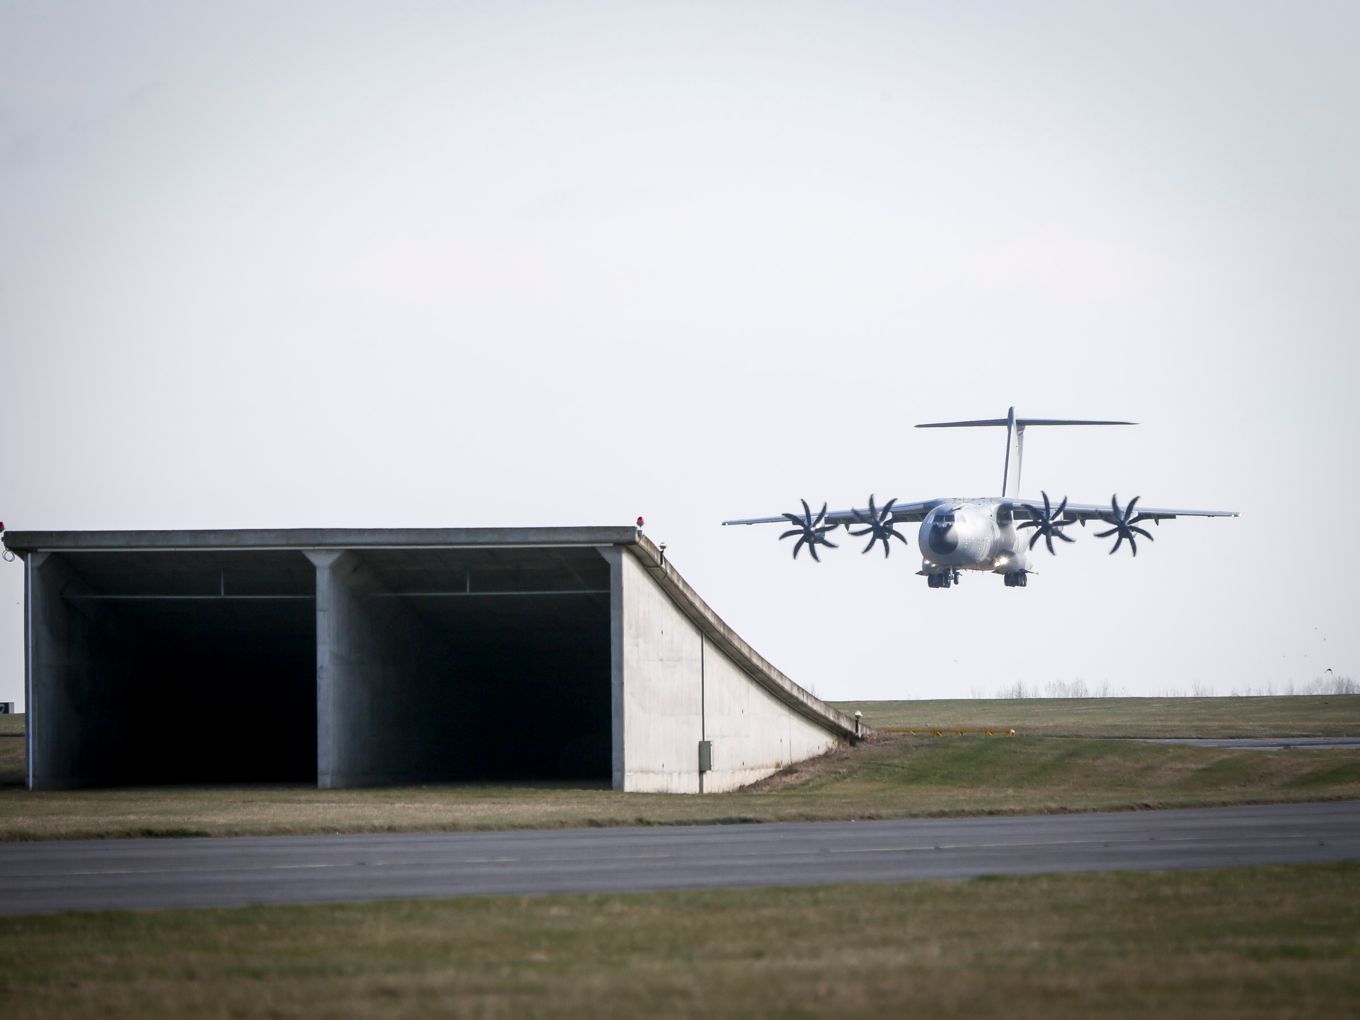 An RAF A400M comes into land at RAF Wittering